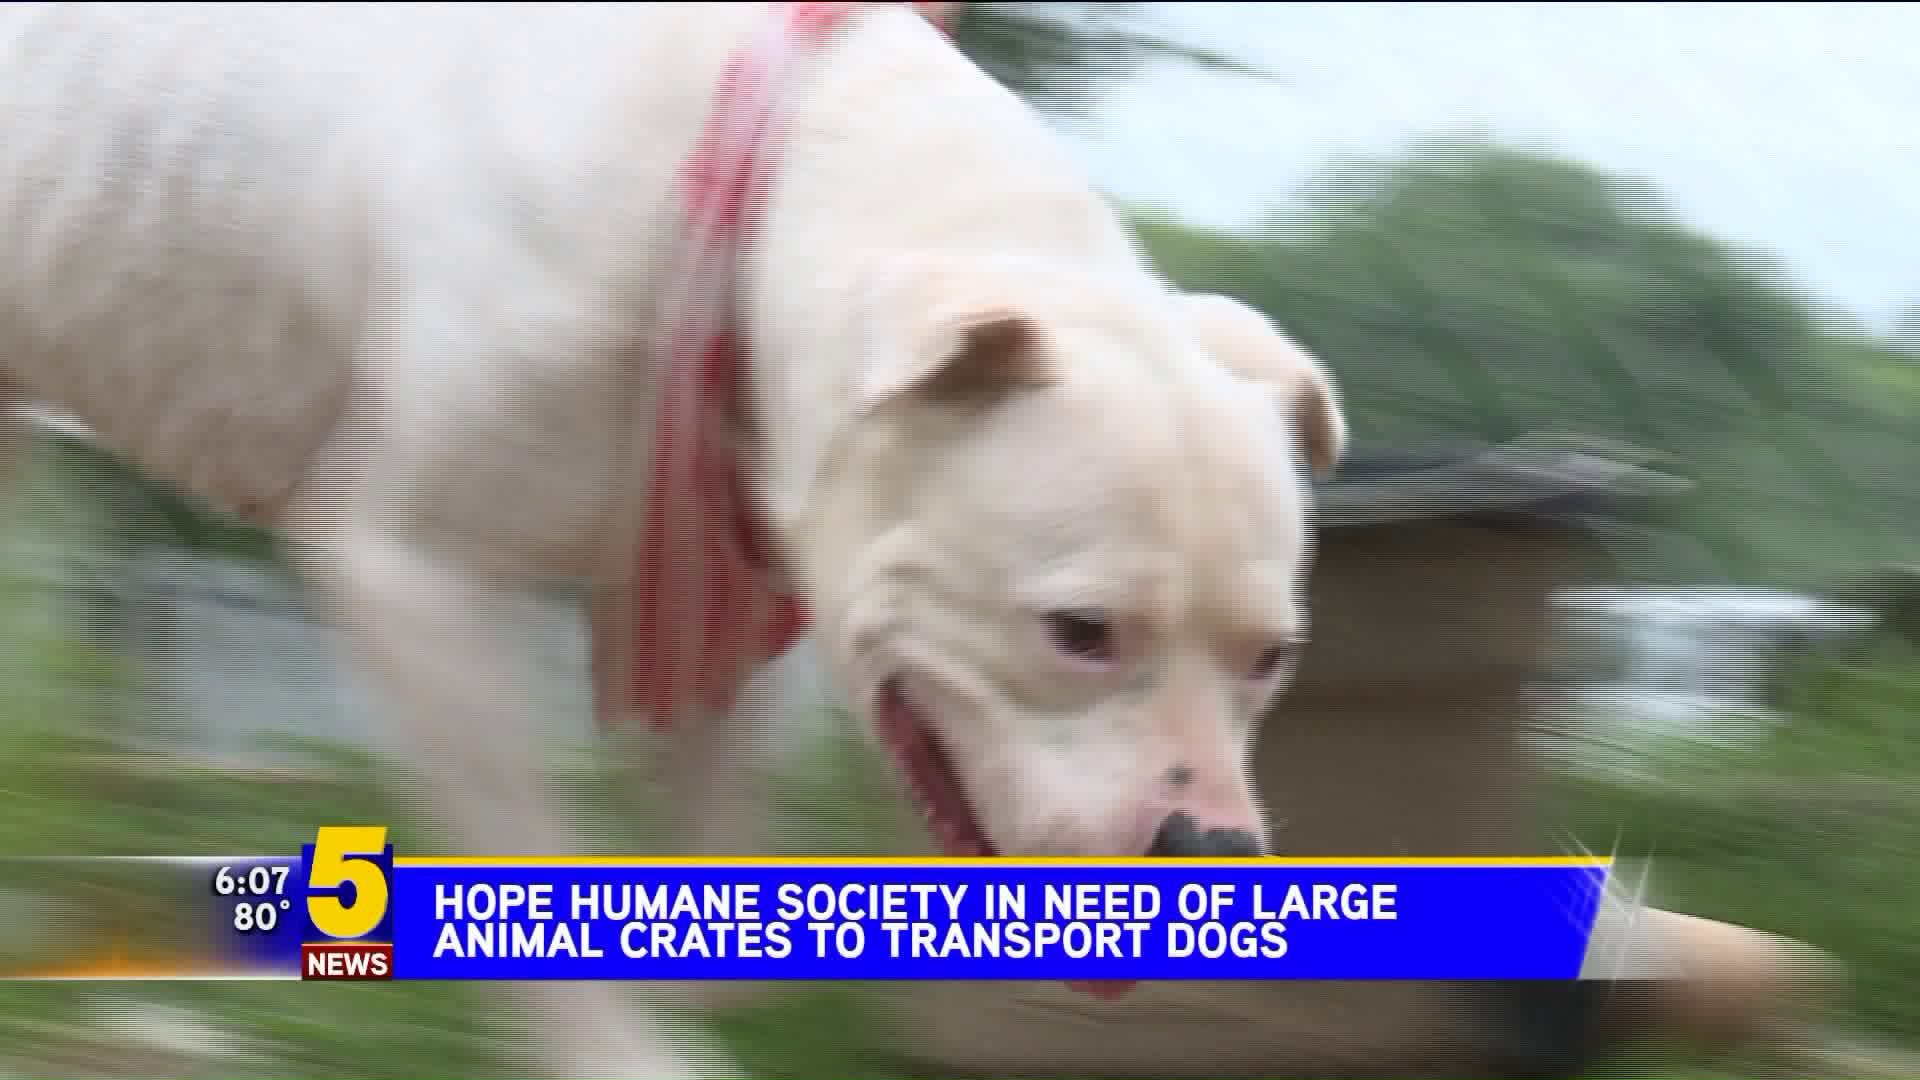 HOPE Humane Society in Need of Large Animal Crates to Transport Dogs